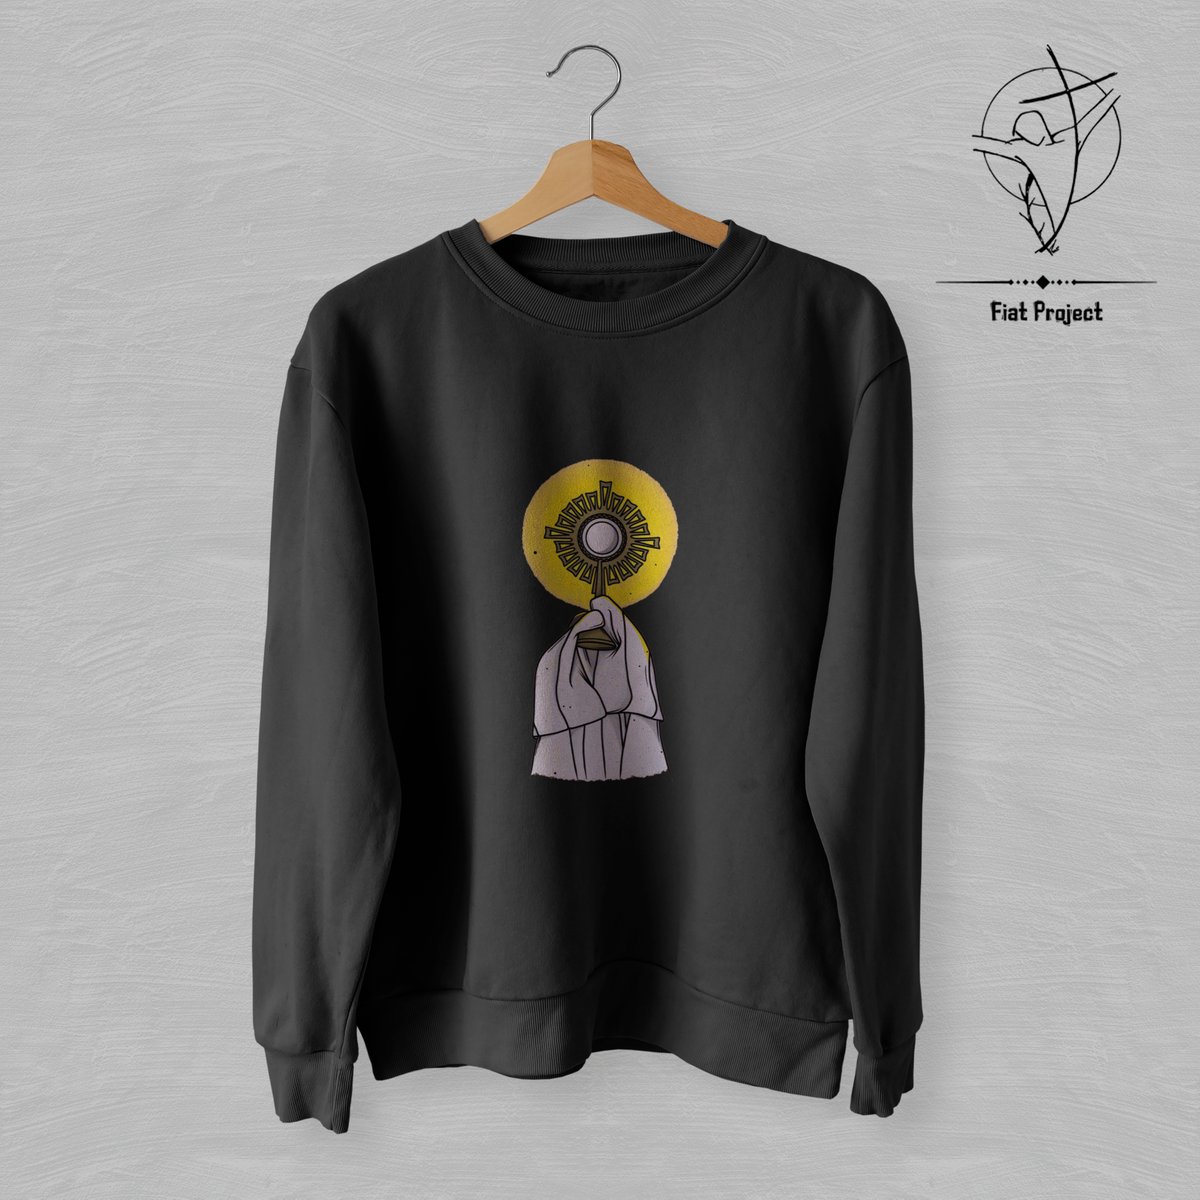 Wrap yourself in tradition and style with our Imani Yangu sweatshirt. Crafted from a luxurious 75% cotton blend, it offers warmth and spirituality wherever you go. 

Nationwide shipping available! 🇰🇪🚚 #KenyanFashion #SpiritualStyle